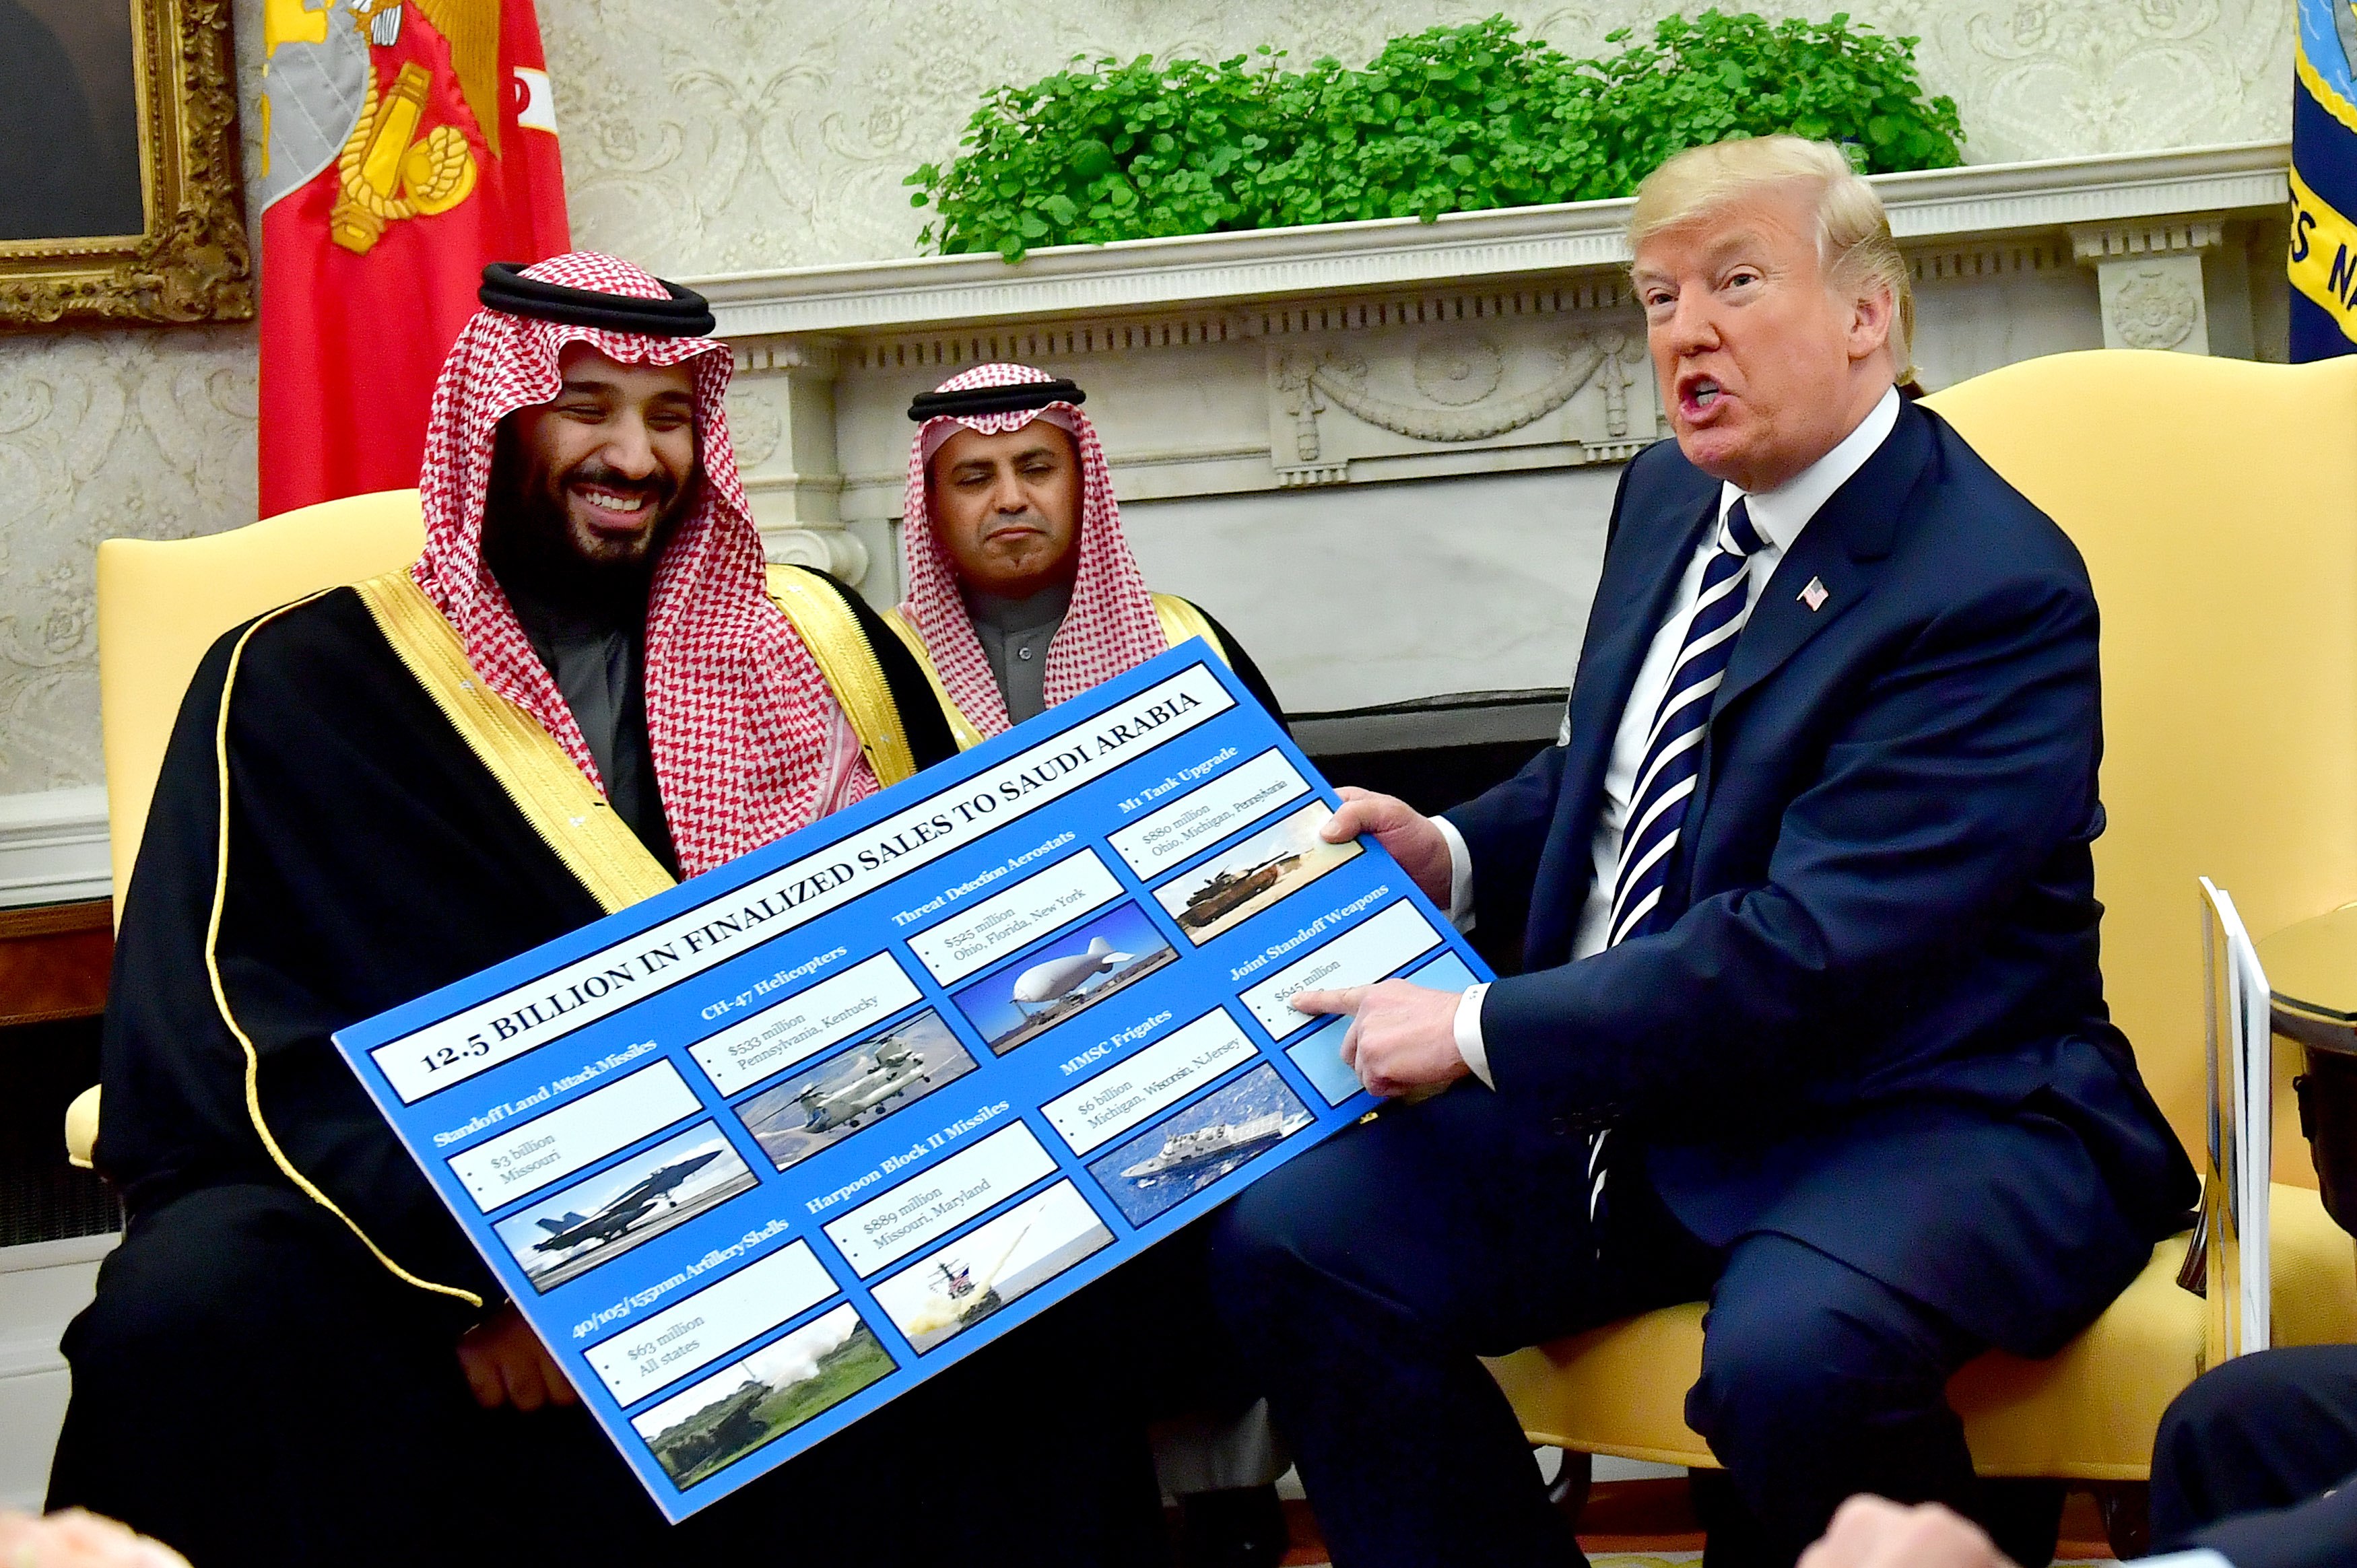 epa06616113 US President Donald J. Trump (R) holds up a chart of military hardware sales as he meets with Crown Prince Mohammed bin Salman (L) of the Kingdom of Saudi Arabia in the Oval Office at the White House in Washington, DC, USA, 20 March 2018.  EPA/KEVIN DIETSCH / POOL